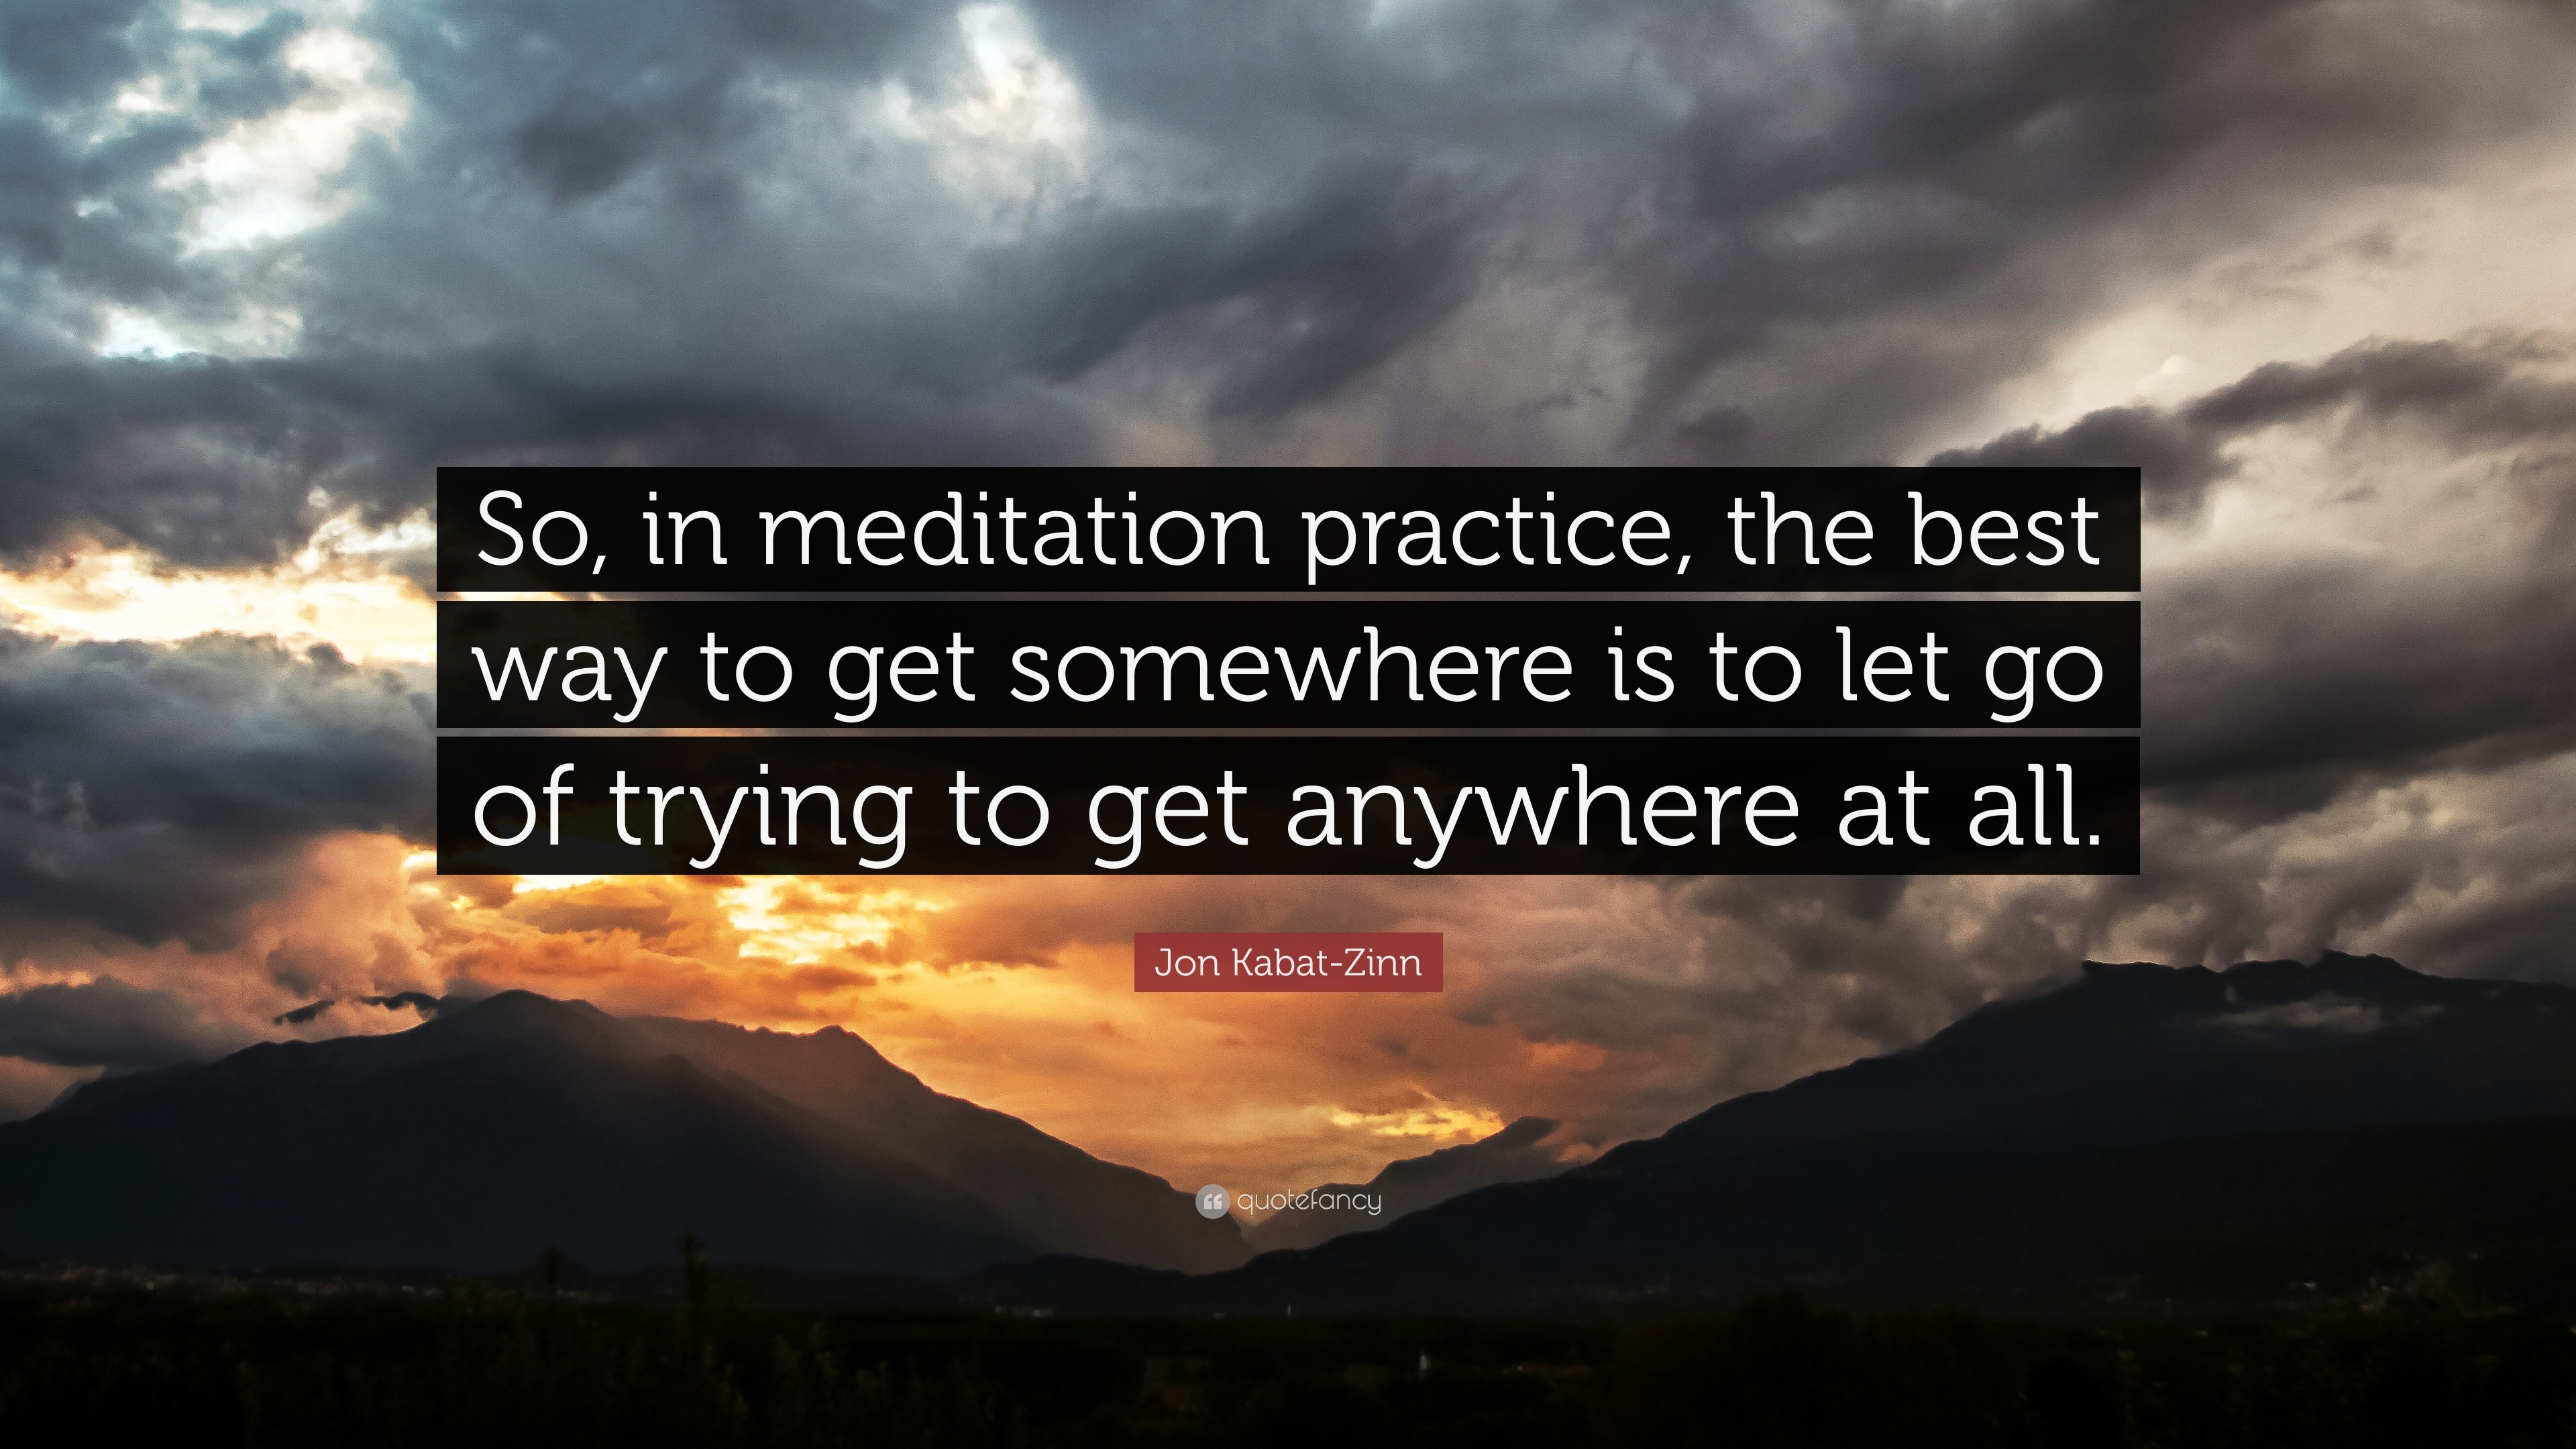 Jon Kabat-Zinn Quote: “So, in meditation practice, the best way to get  somewhere is to